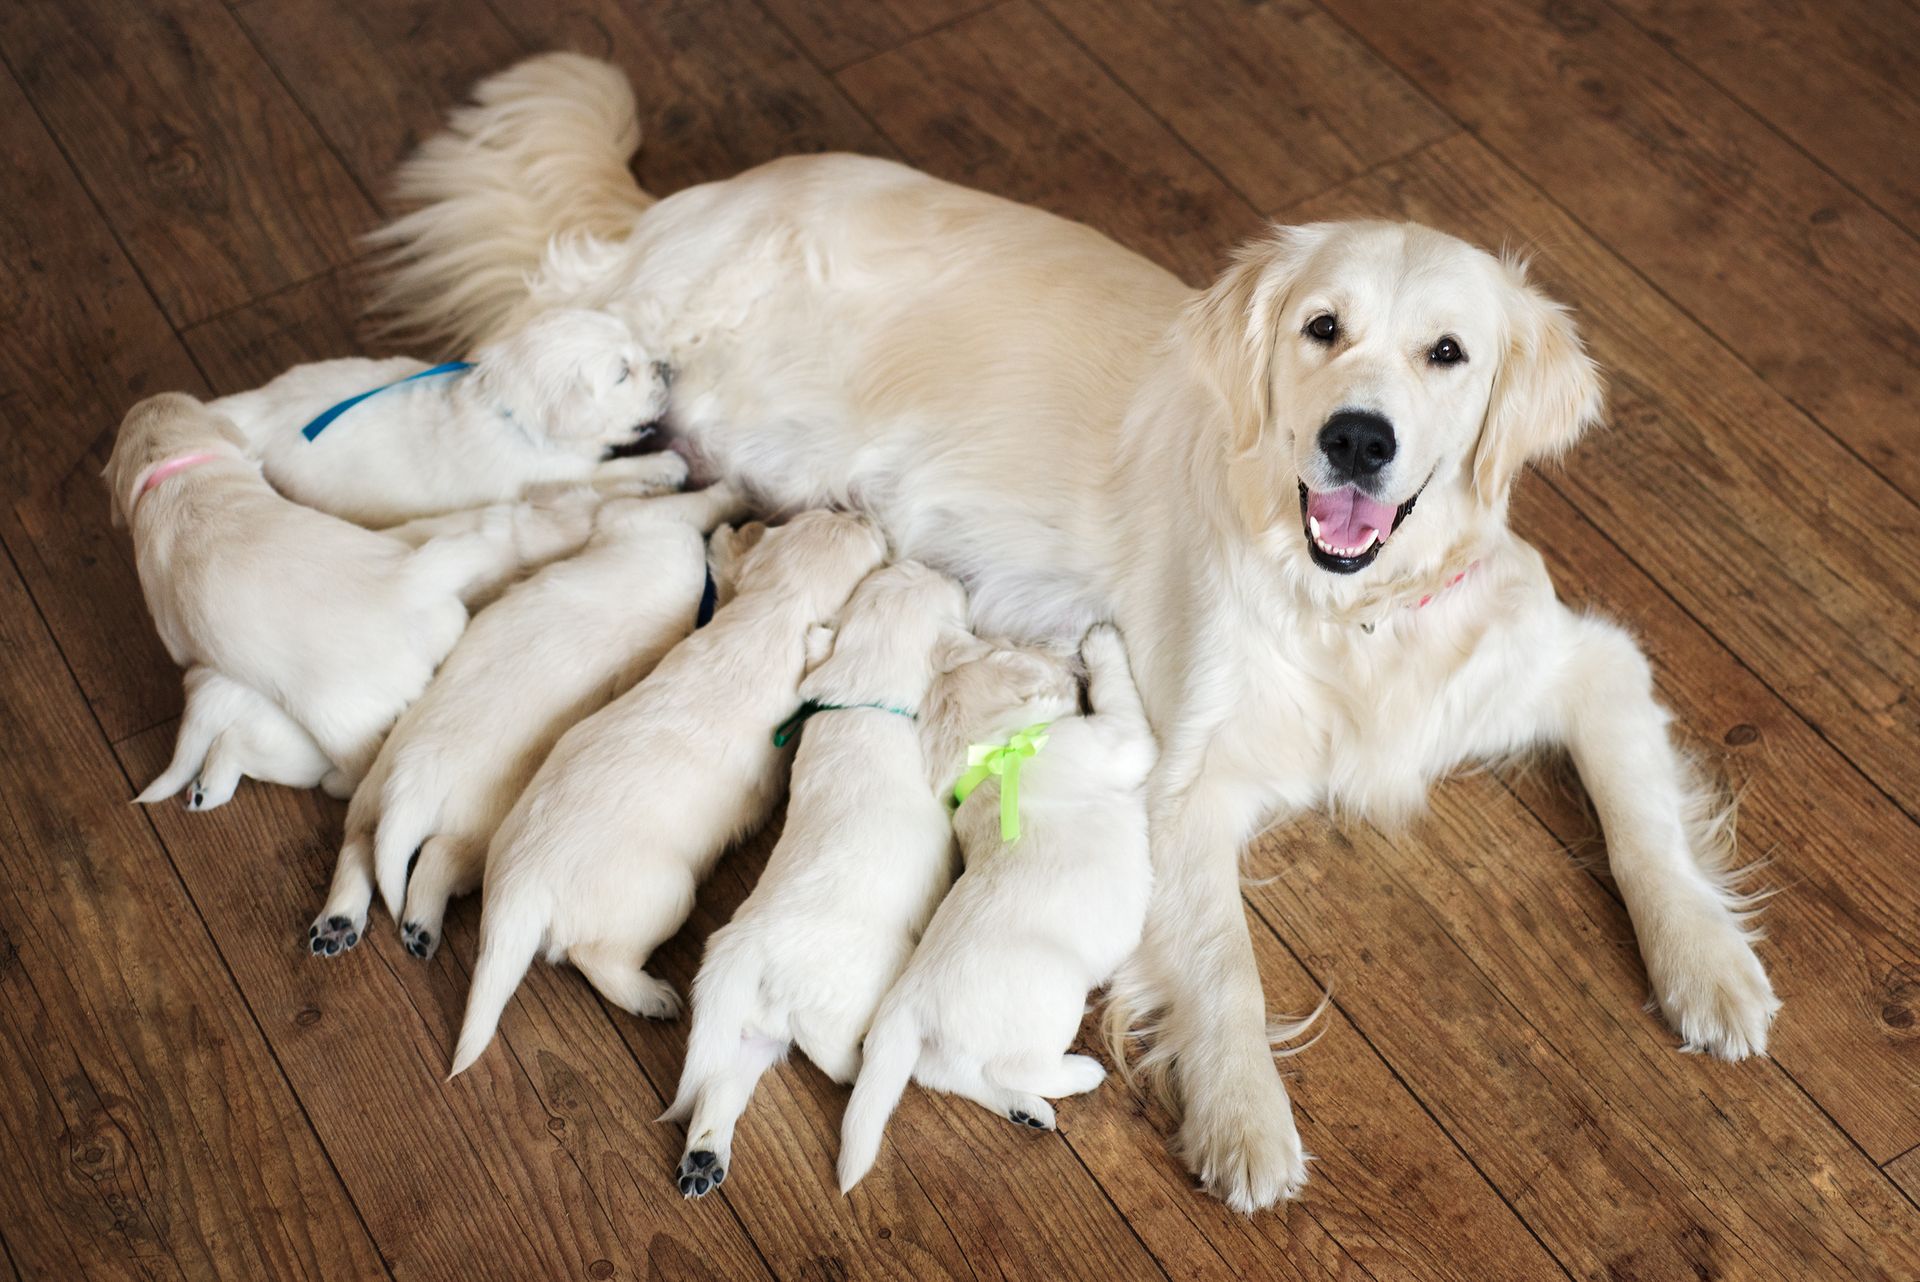 How long can dogs be in Labour for?